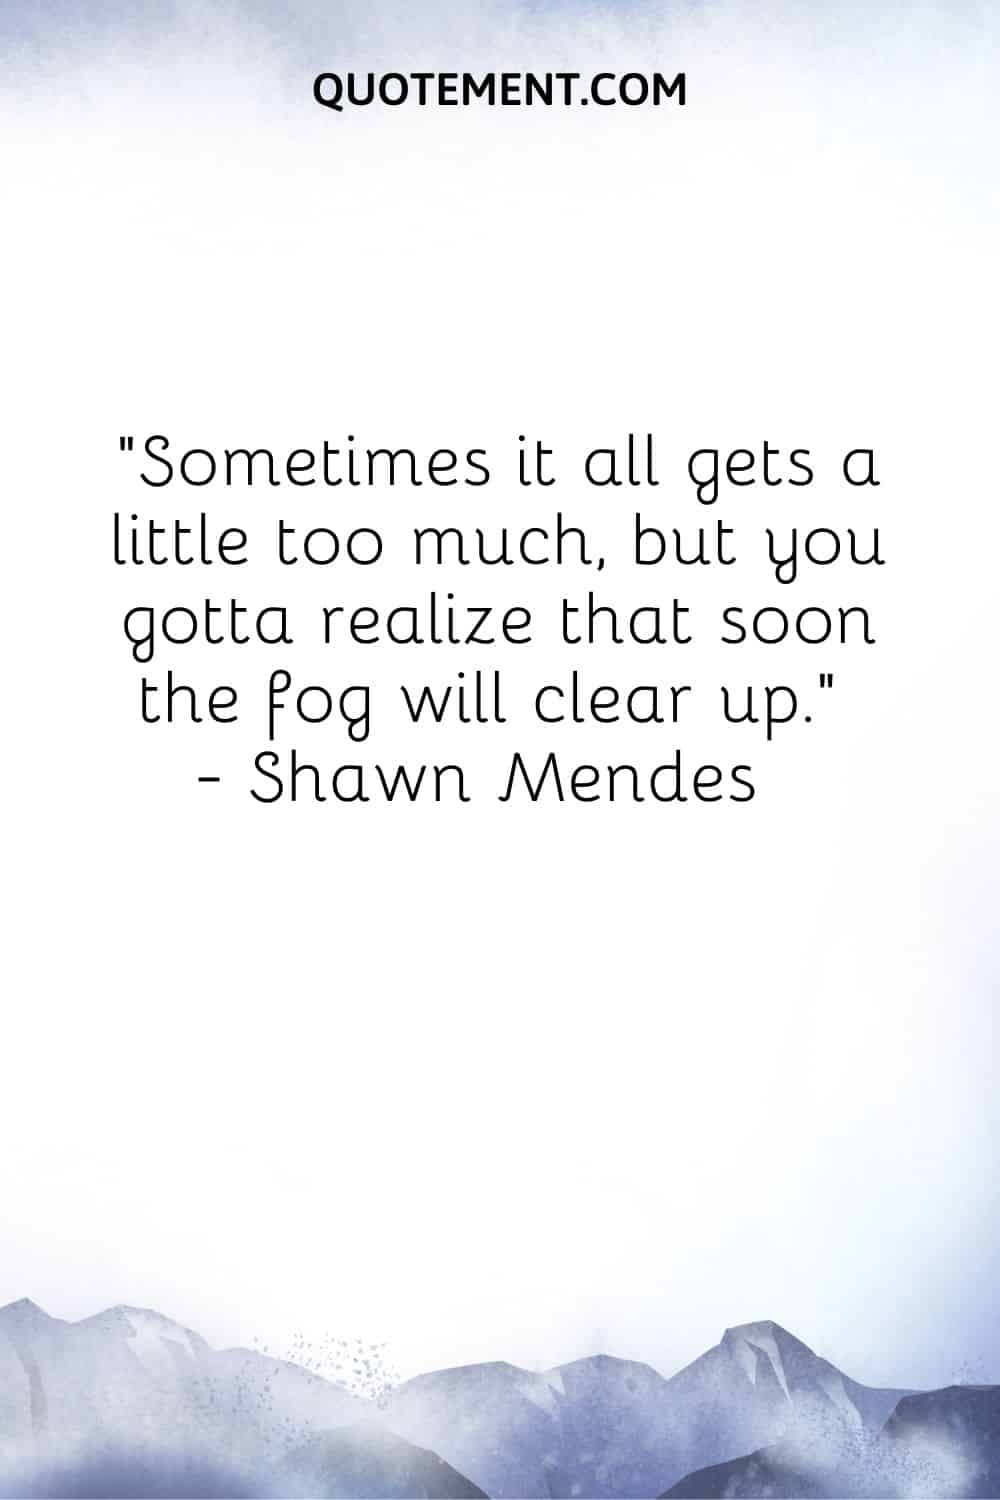 Sometimes it all gets a little too much, but you gotta realize that soon the fog will clear up